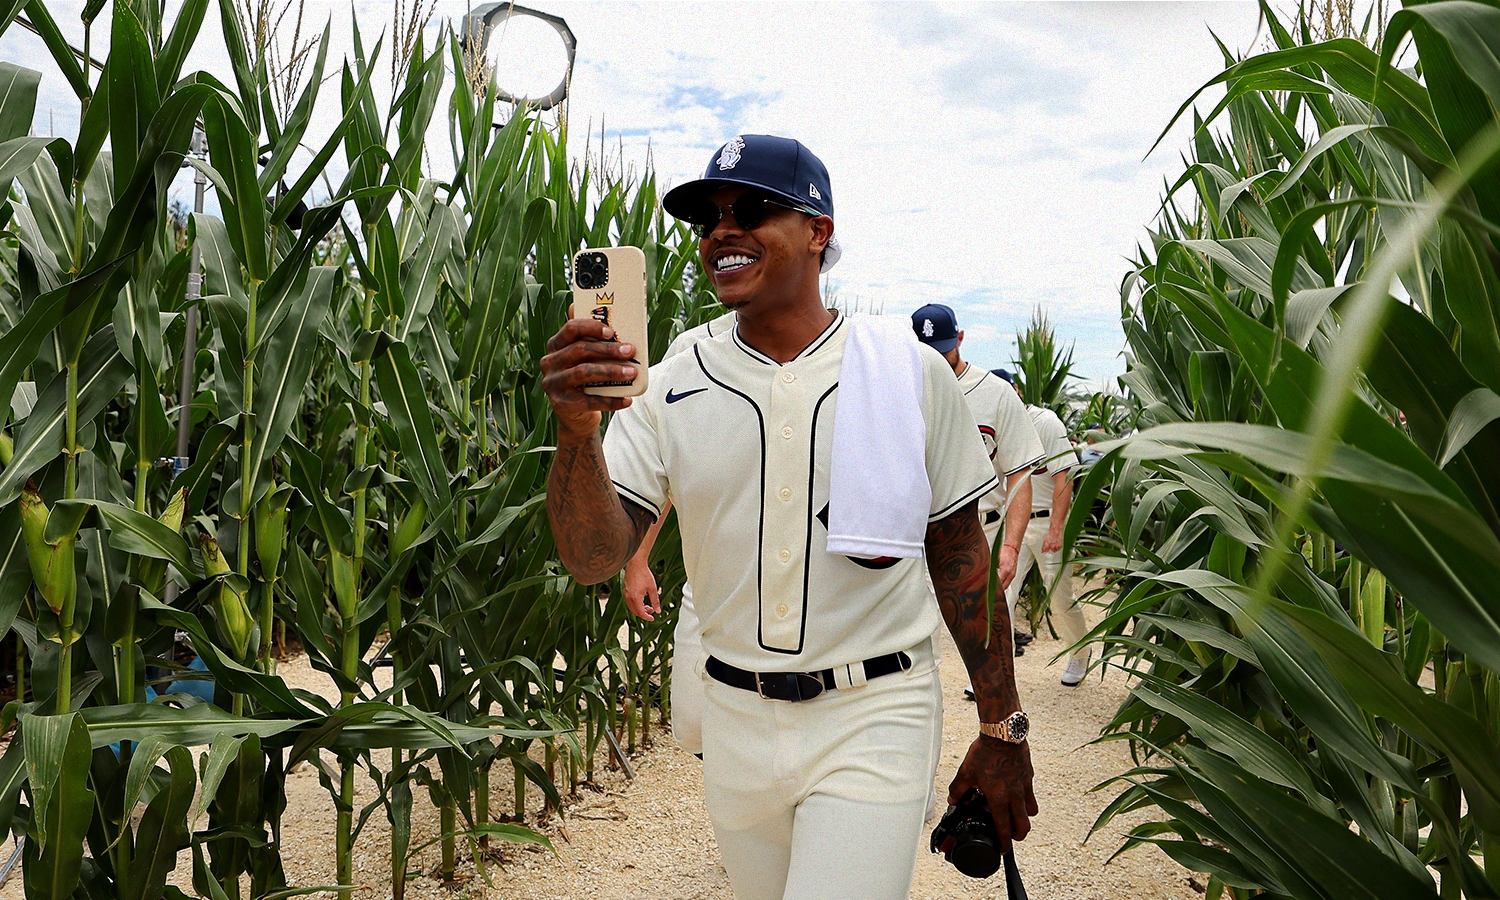 White Sox, Yankees Go Deep Into Corn In 'Field Of Dreams' Game